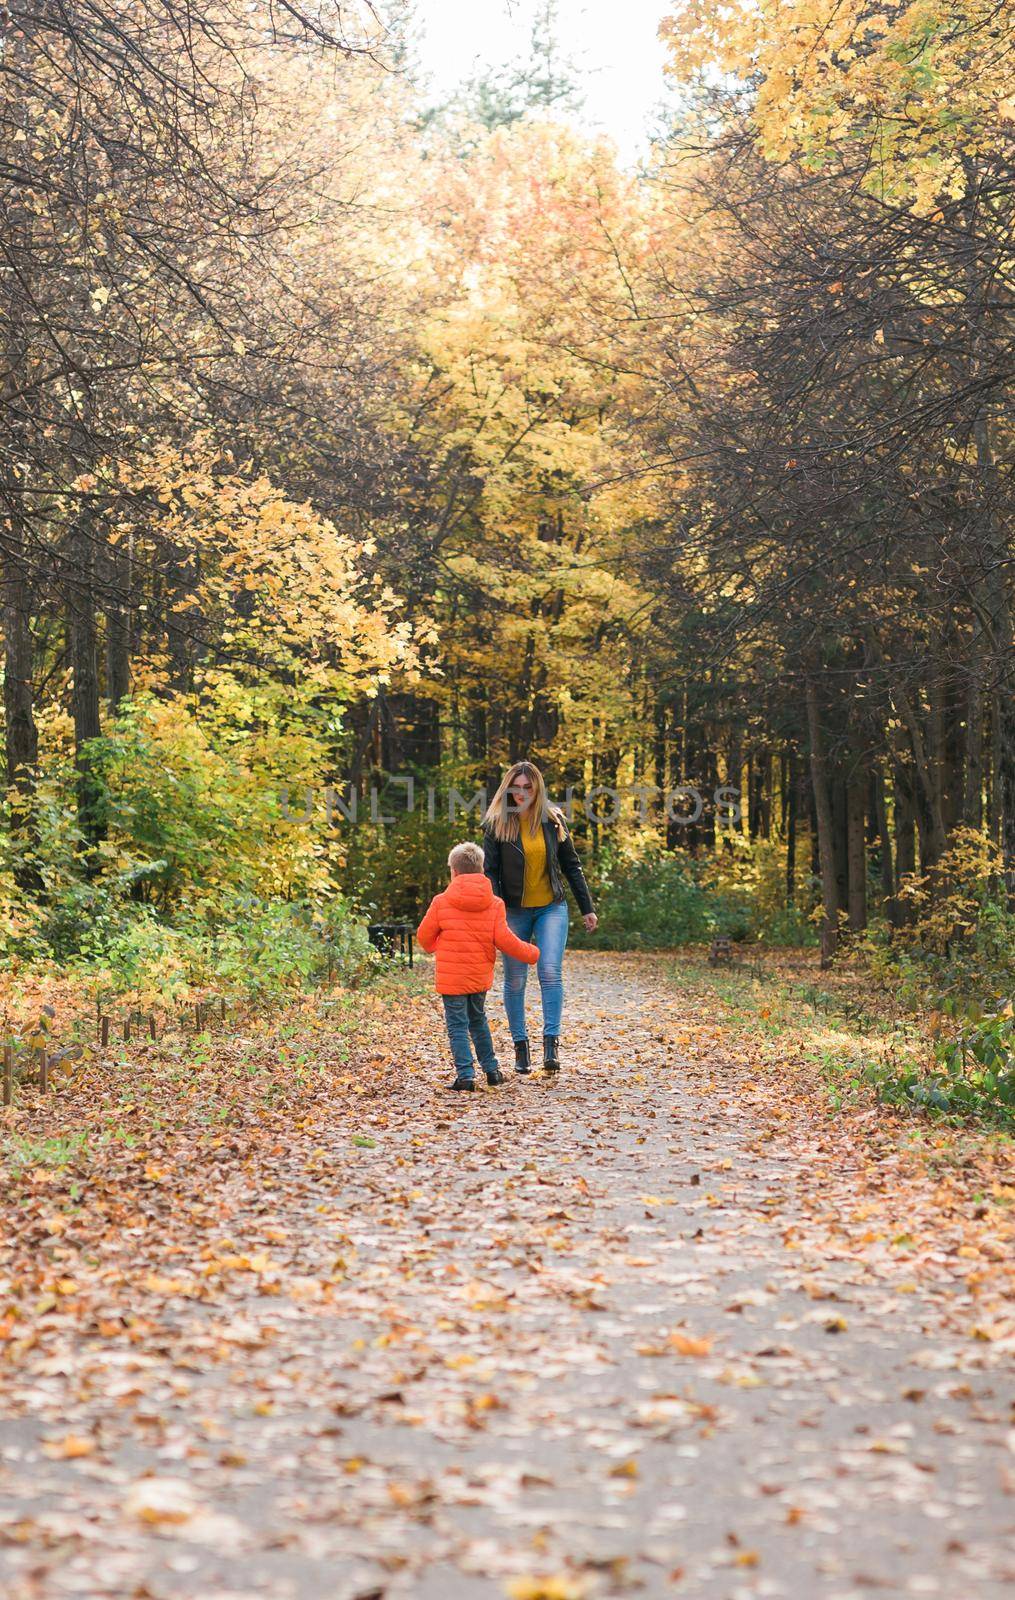 Mother and son walking in the fall park and enjoying the beautiful autumn nature. Season, single parent and children concept